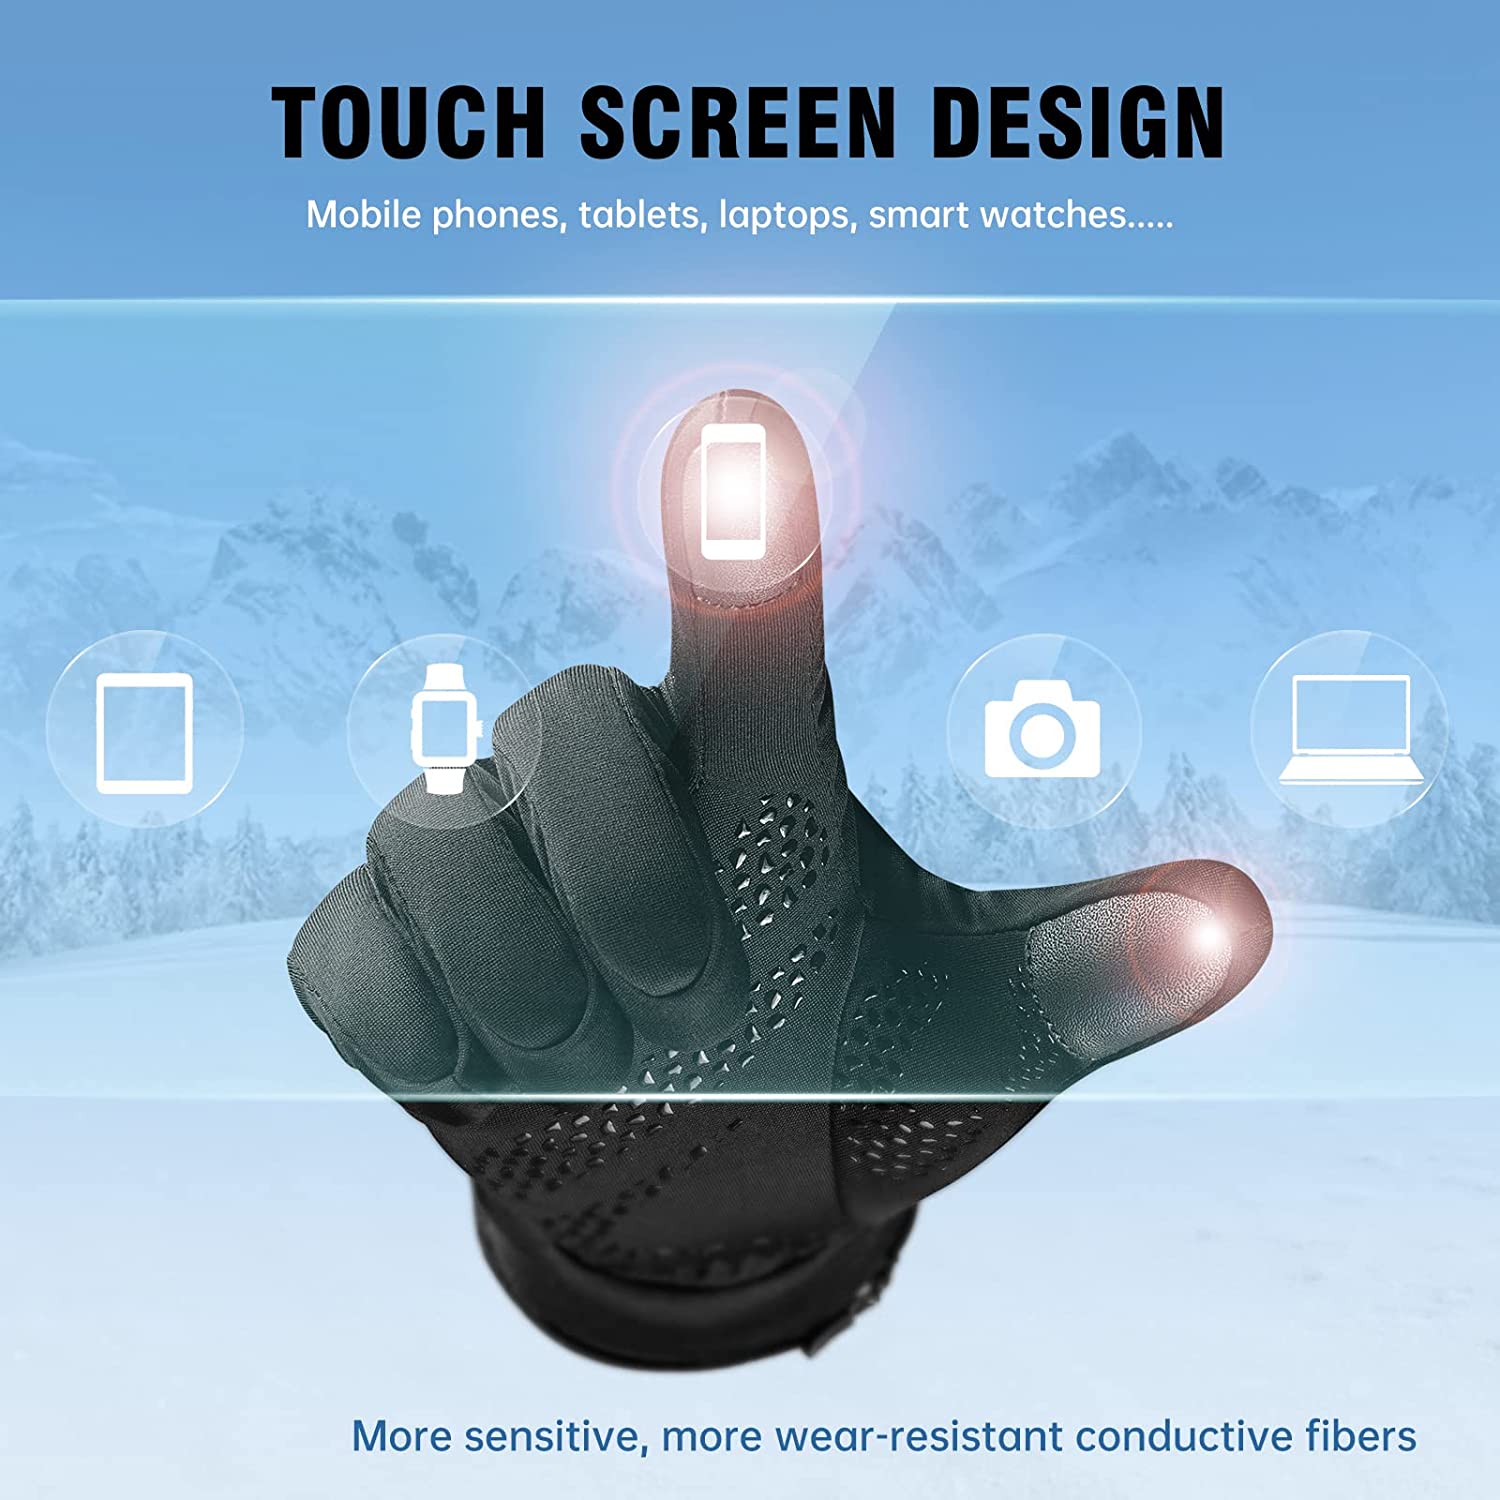 One black rechargeable heated glove. The text says, 'Touch screen design, mobile phones, tablets, laptops, smart watches.'